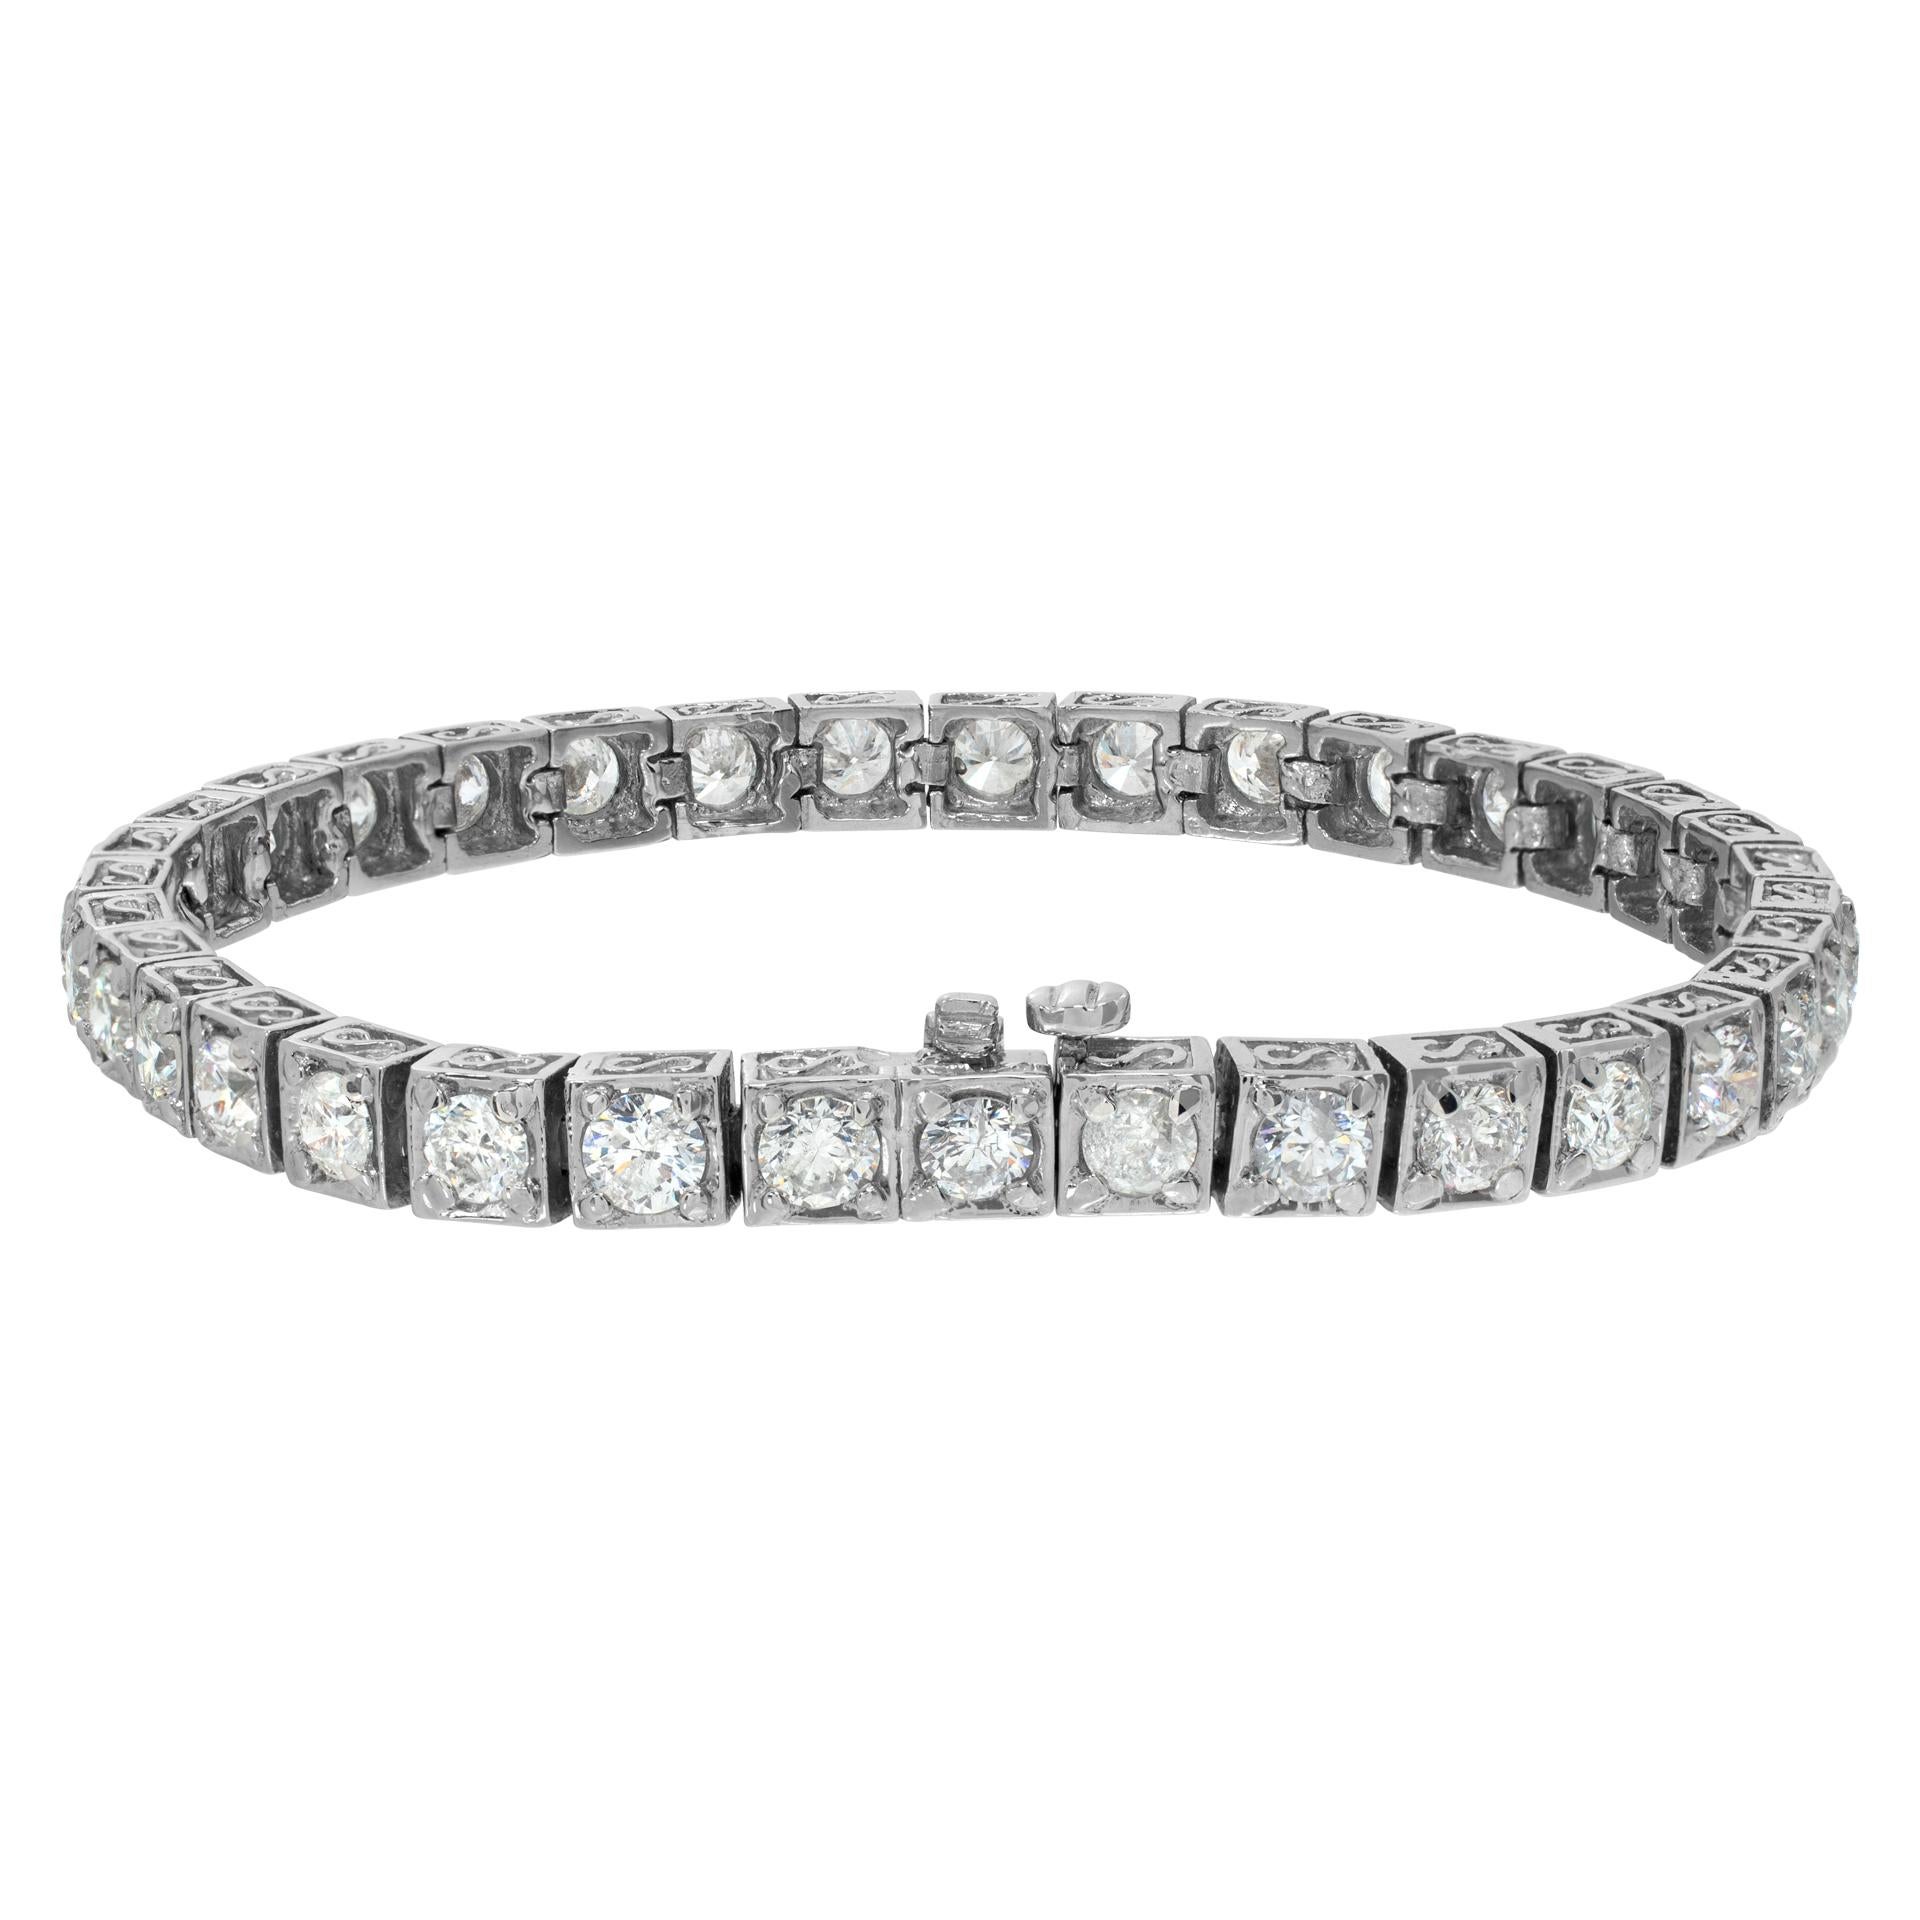 Platinum diamond bracelet w/ round brilliant cut diamonds set in 4 prong setting In Excellent Condition For Sale In Surfside, FL